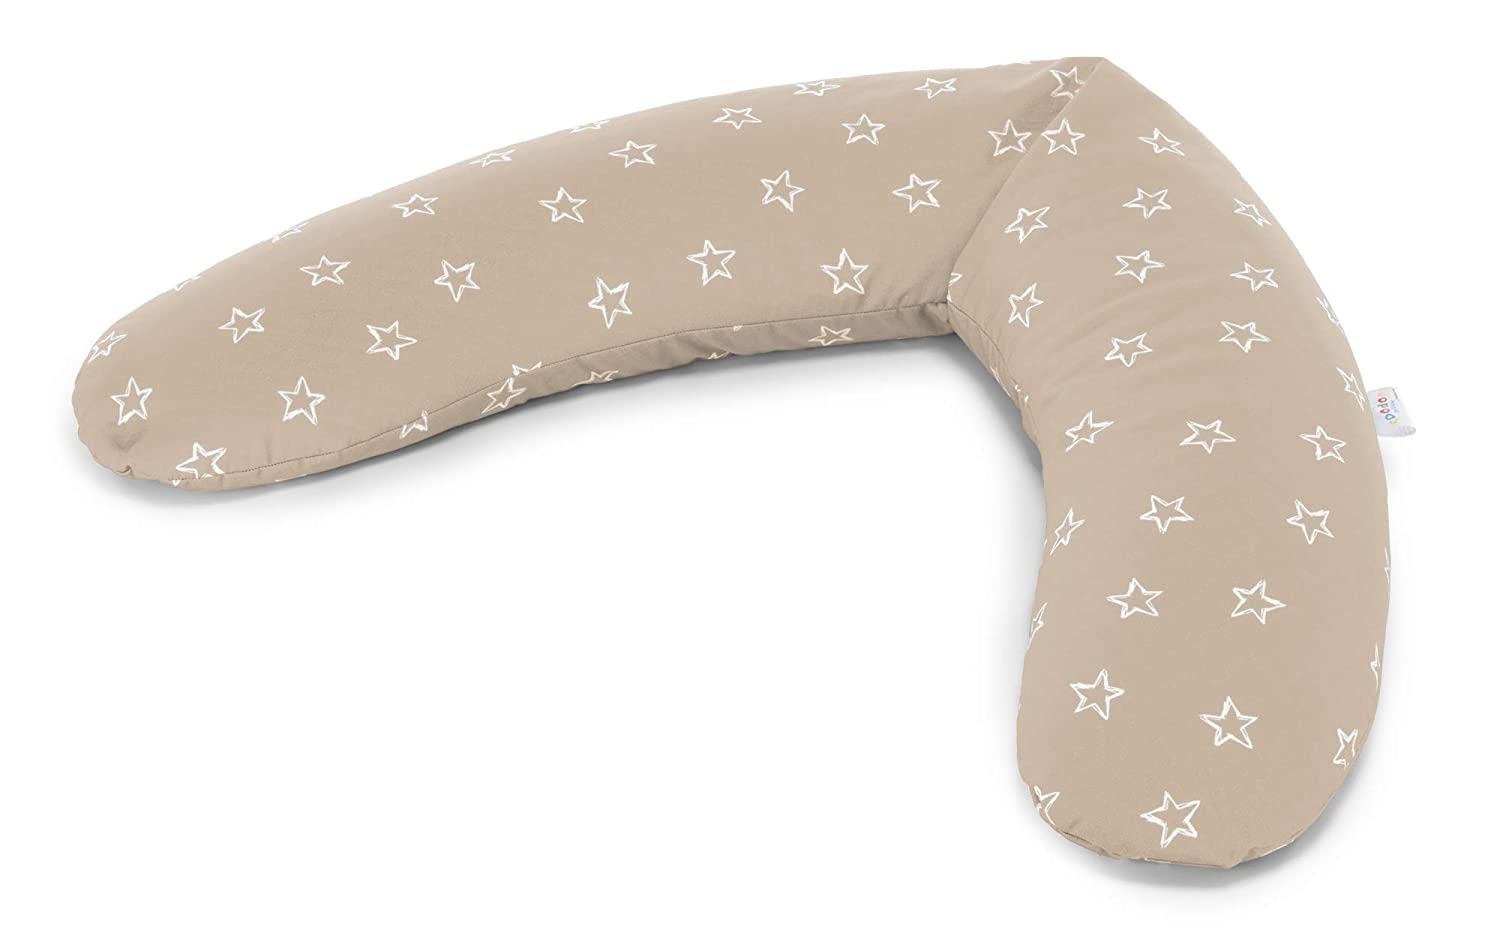 Theraline Dodo Pregnancy And Breastfeeding Pillow Filled With Micro Beads, Includes Outer Cover, 170 x 34 Cm